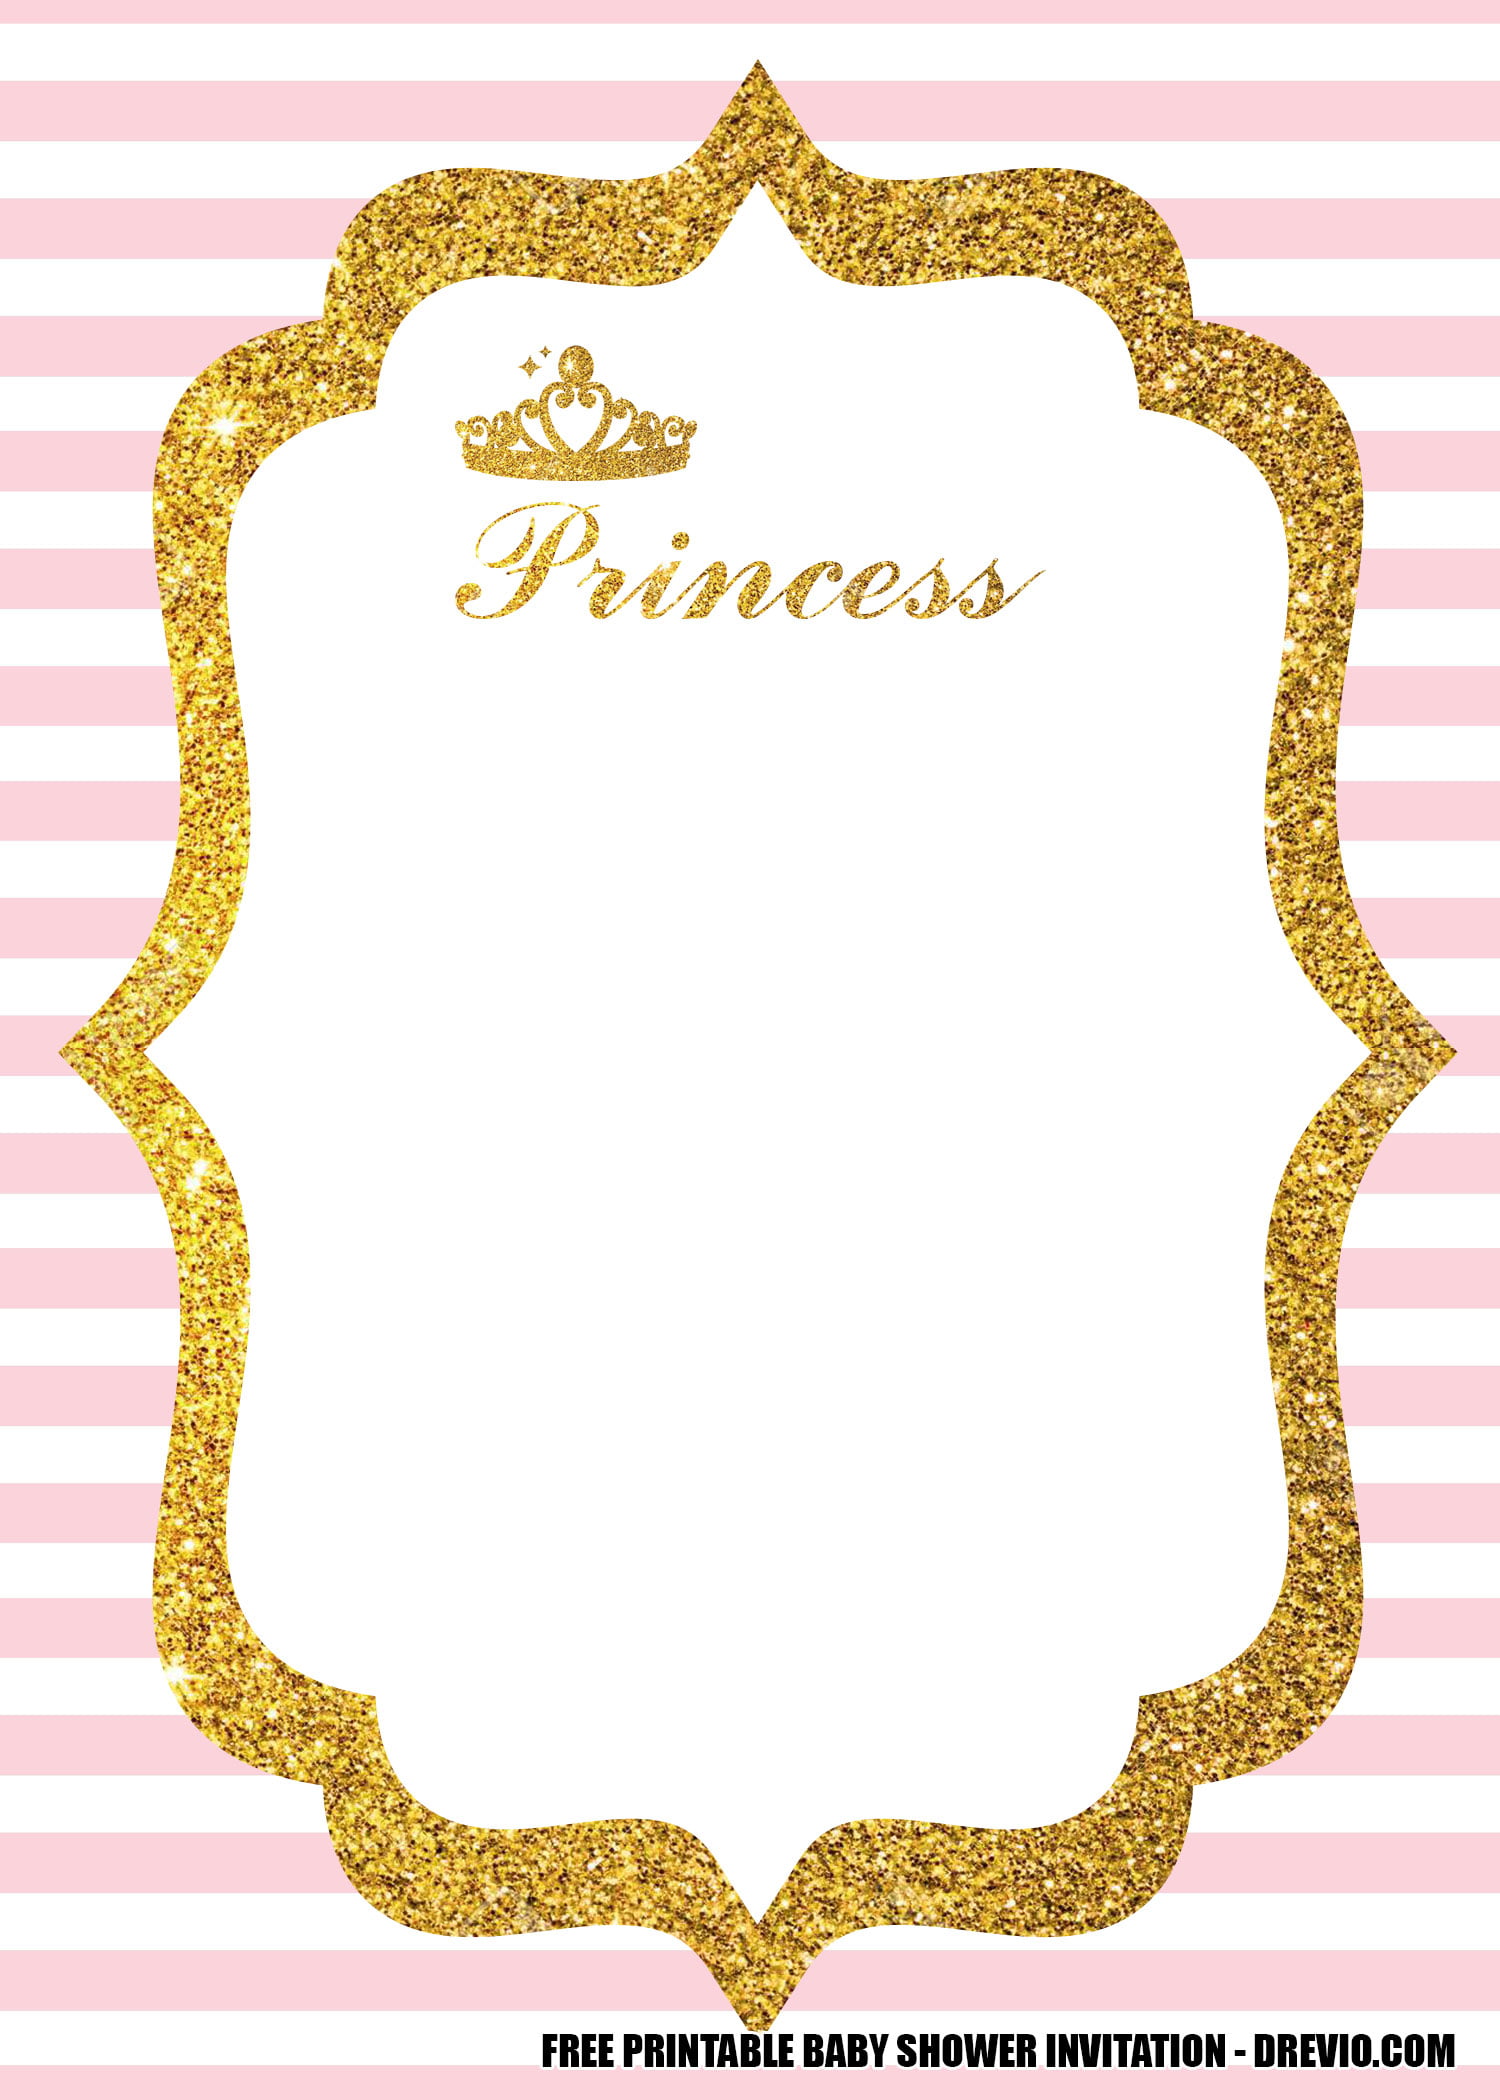 FREE Pink Princess Themed Party Invitation Templates Download Hundreds FREE PRINTABLE Birthday